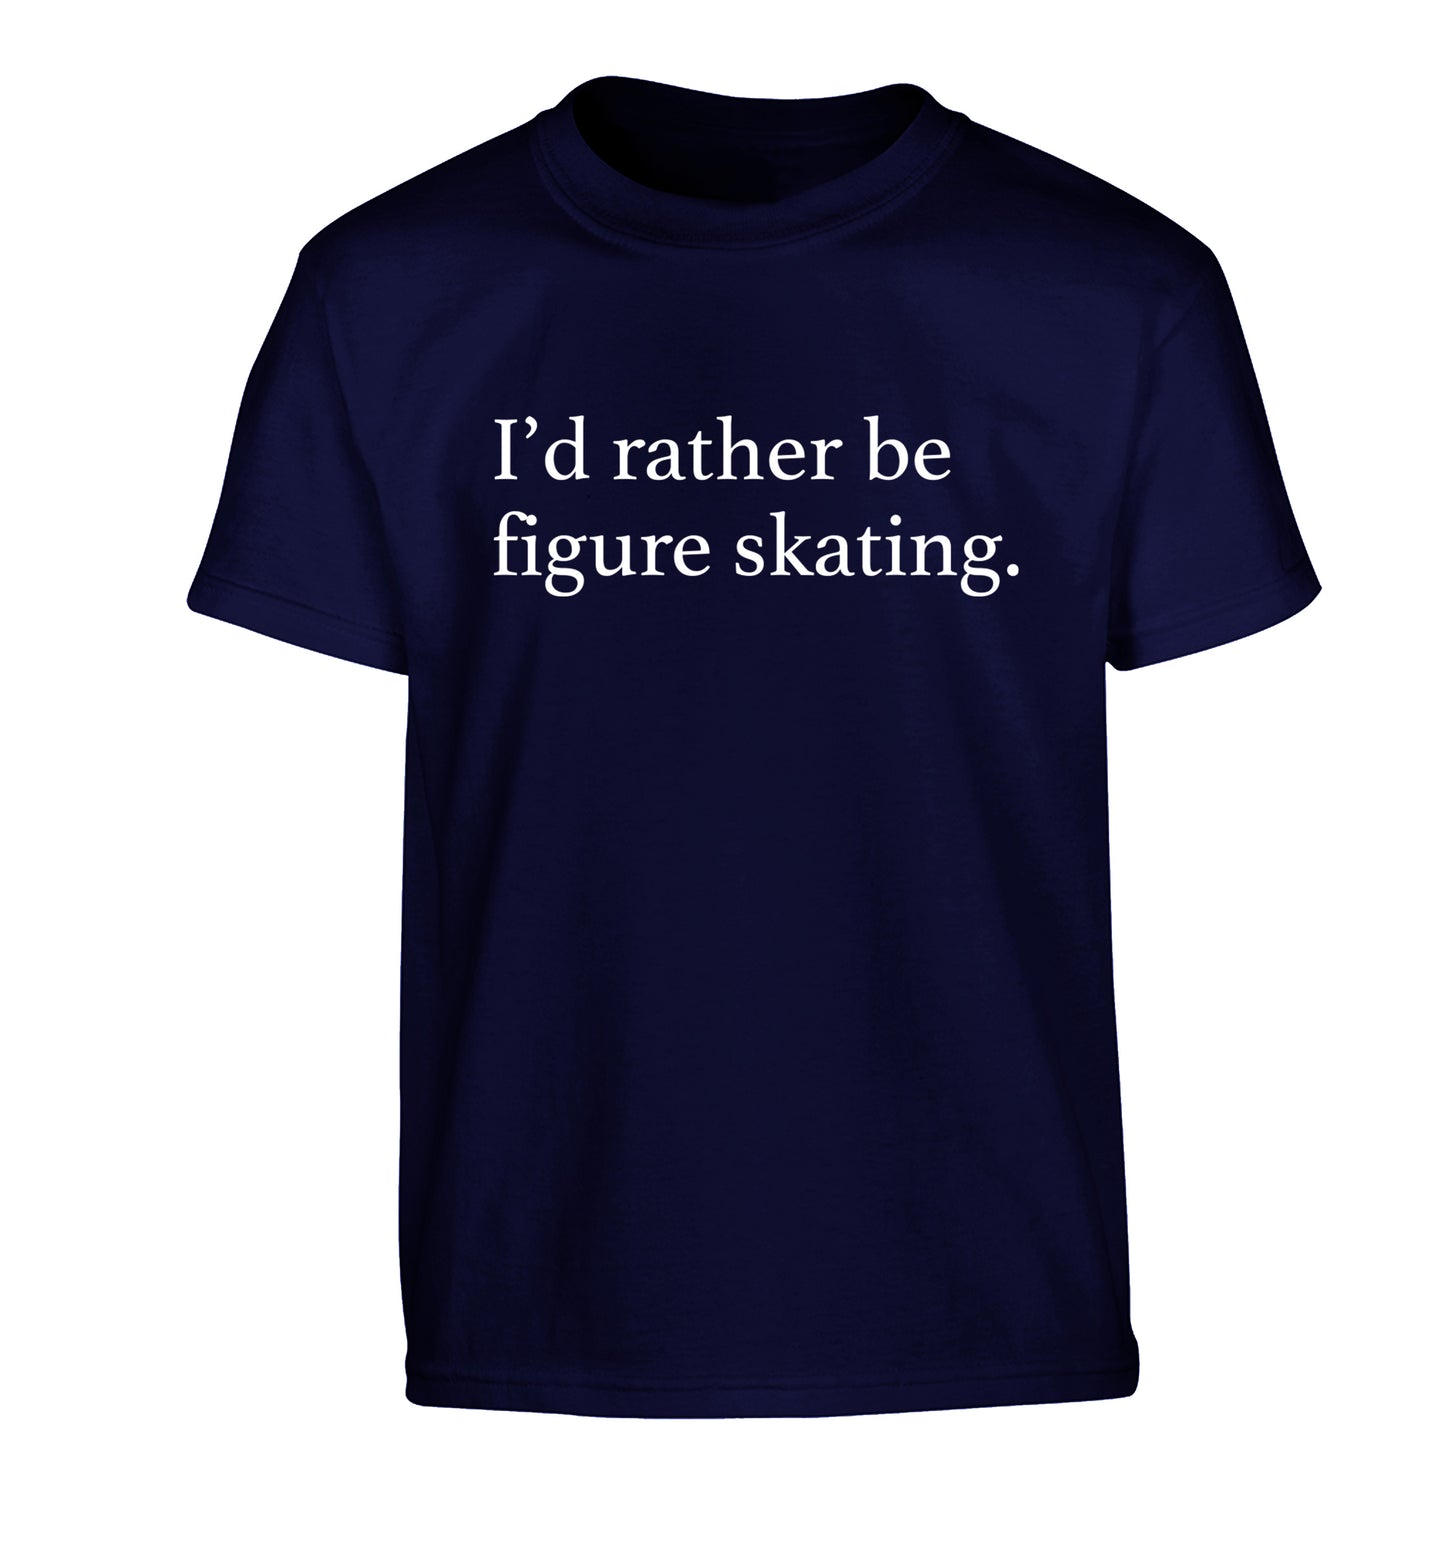 I'd rather be figure skating Children's navy Tshirt 12-14 Years